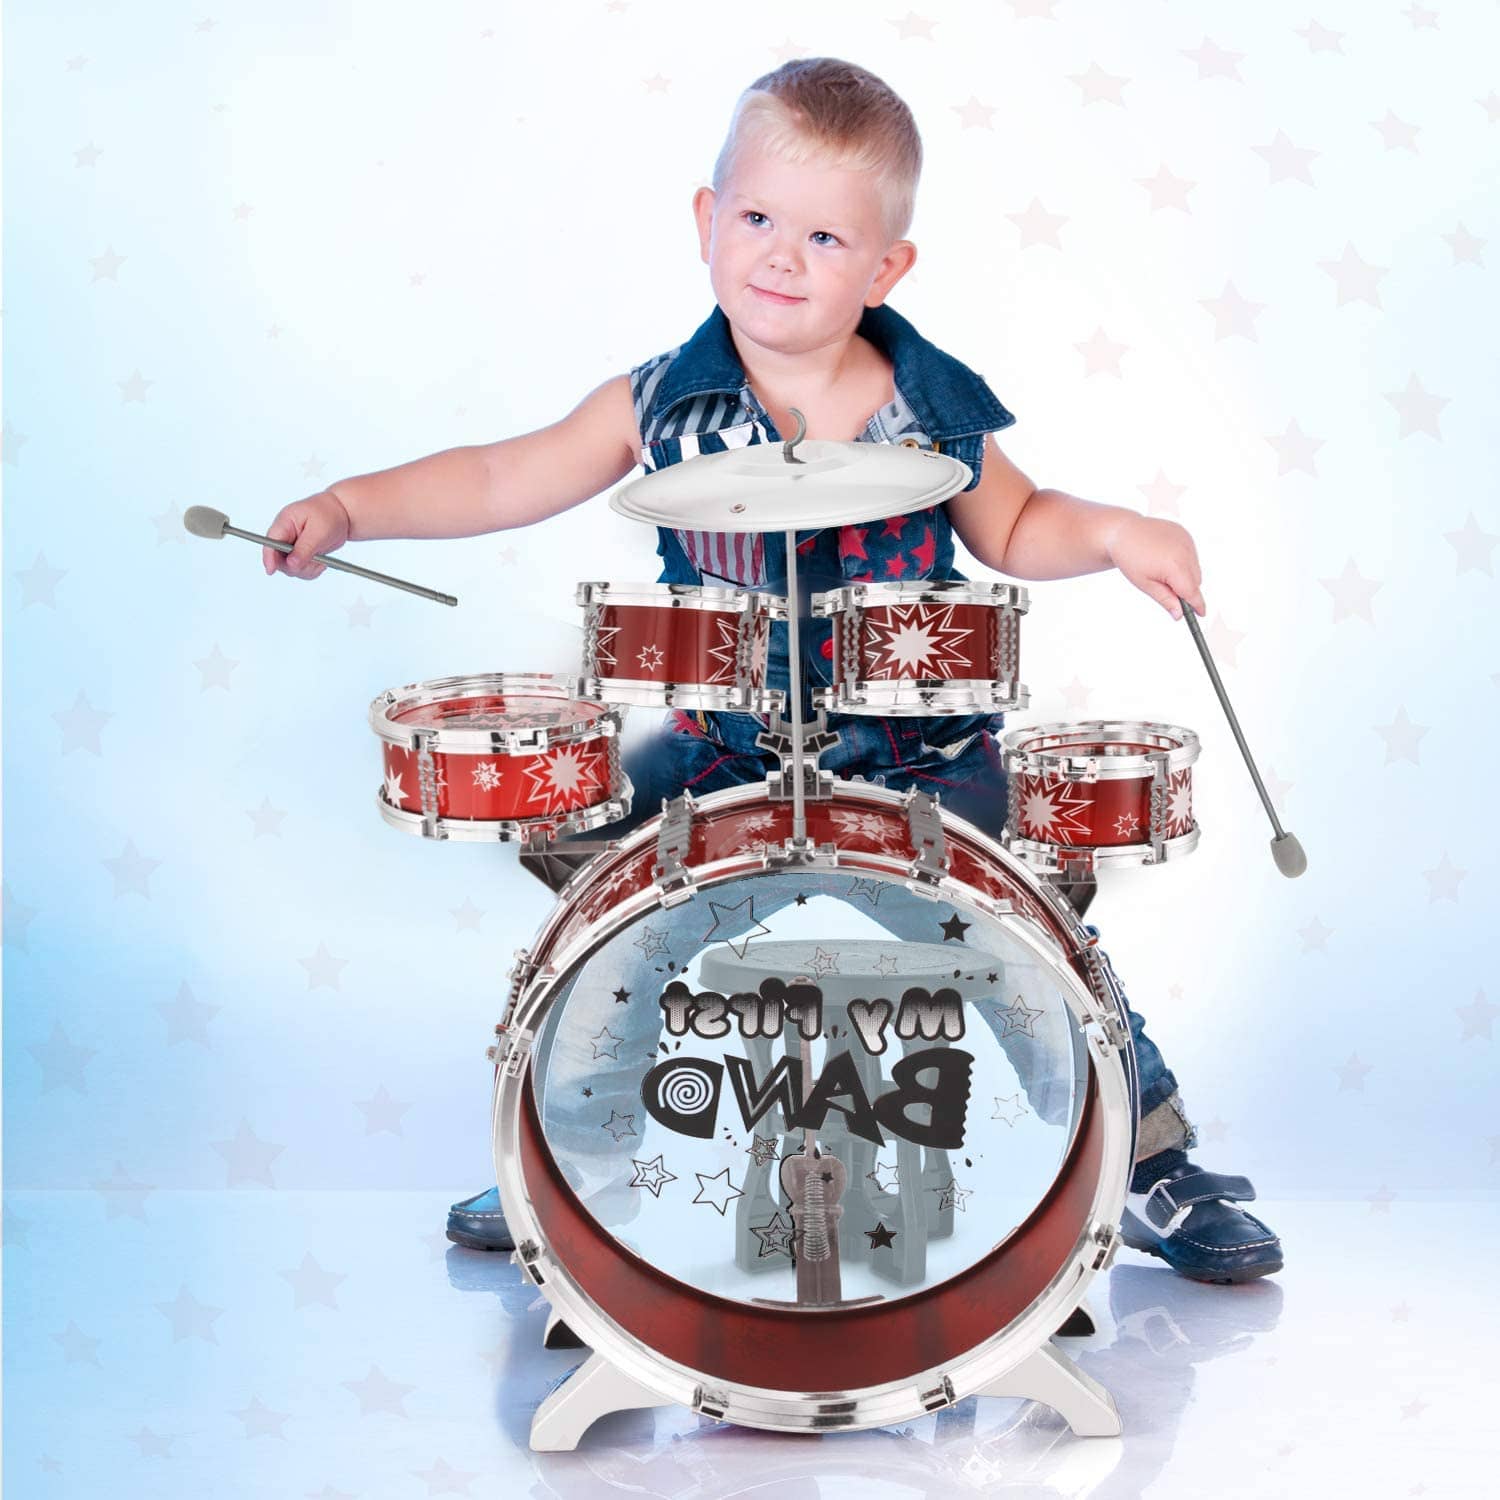 Reditmo Kids Jazz Drum Set, 6 Drums, 2 Cymbals, Chair, Kick Pedal, 2 Drumsticks, Stool, Early Education Musical Instrument to Develop Children’s Creativity, Red 14